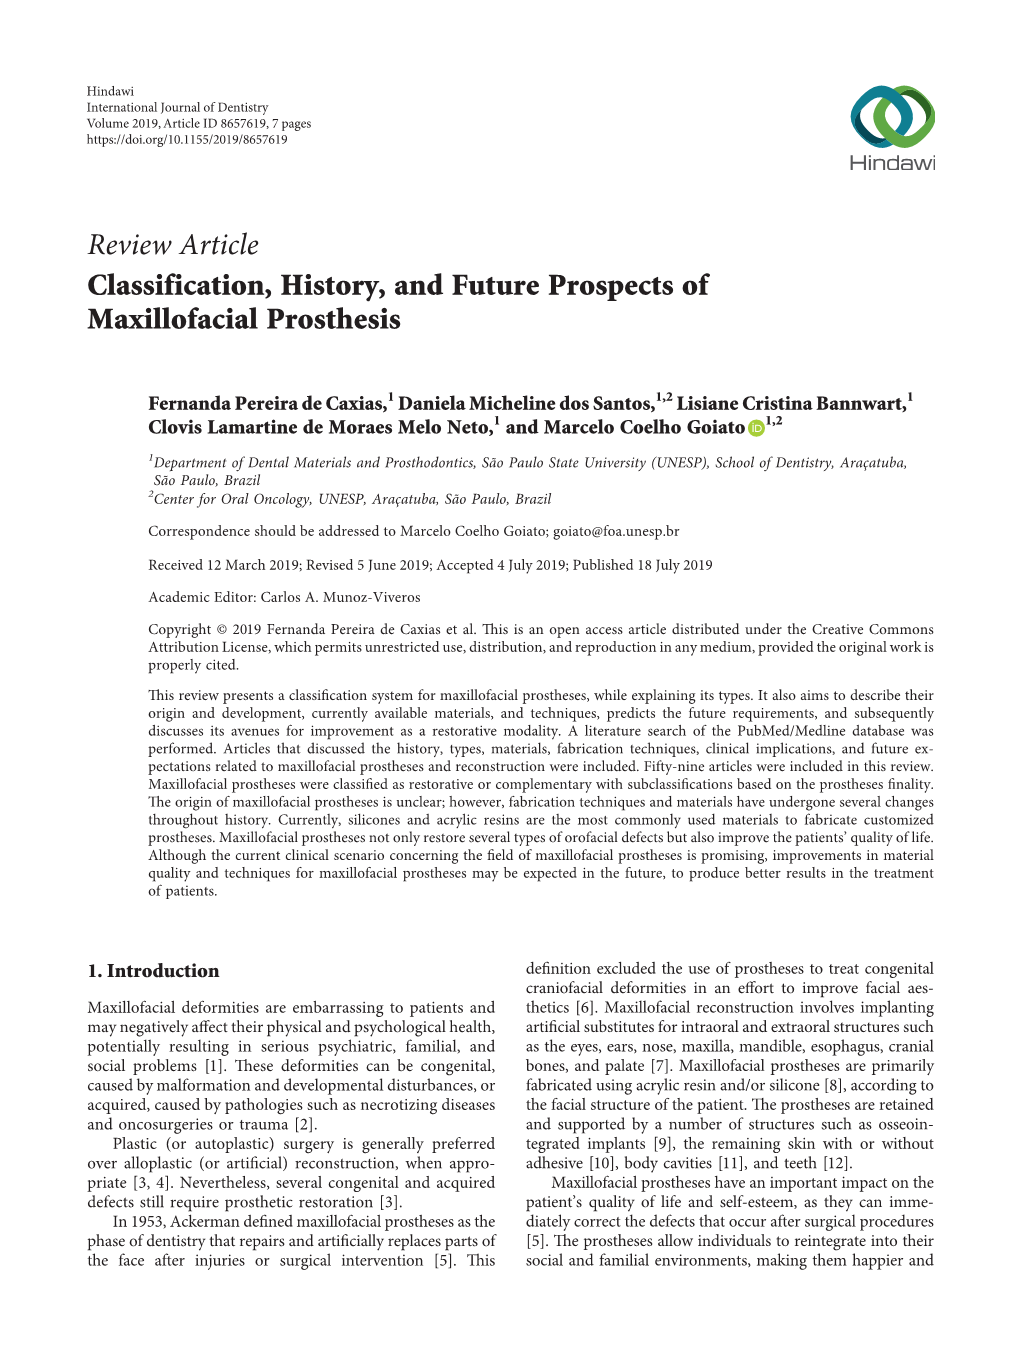 Classification, History, and Future Prospects of Maxillofacial Prosthesis